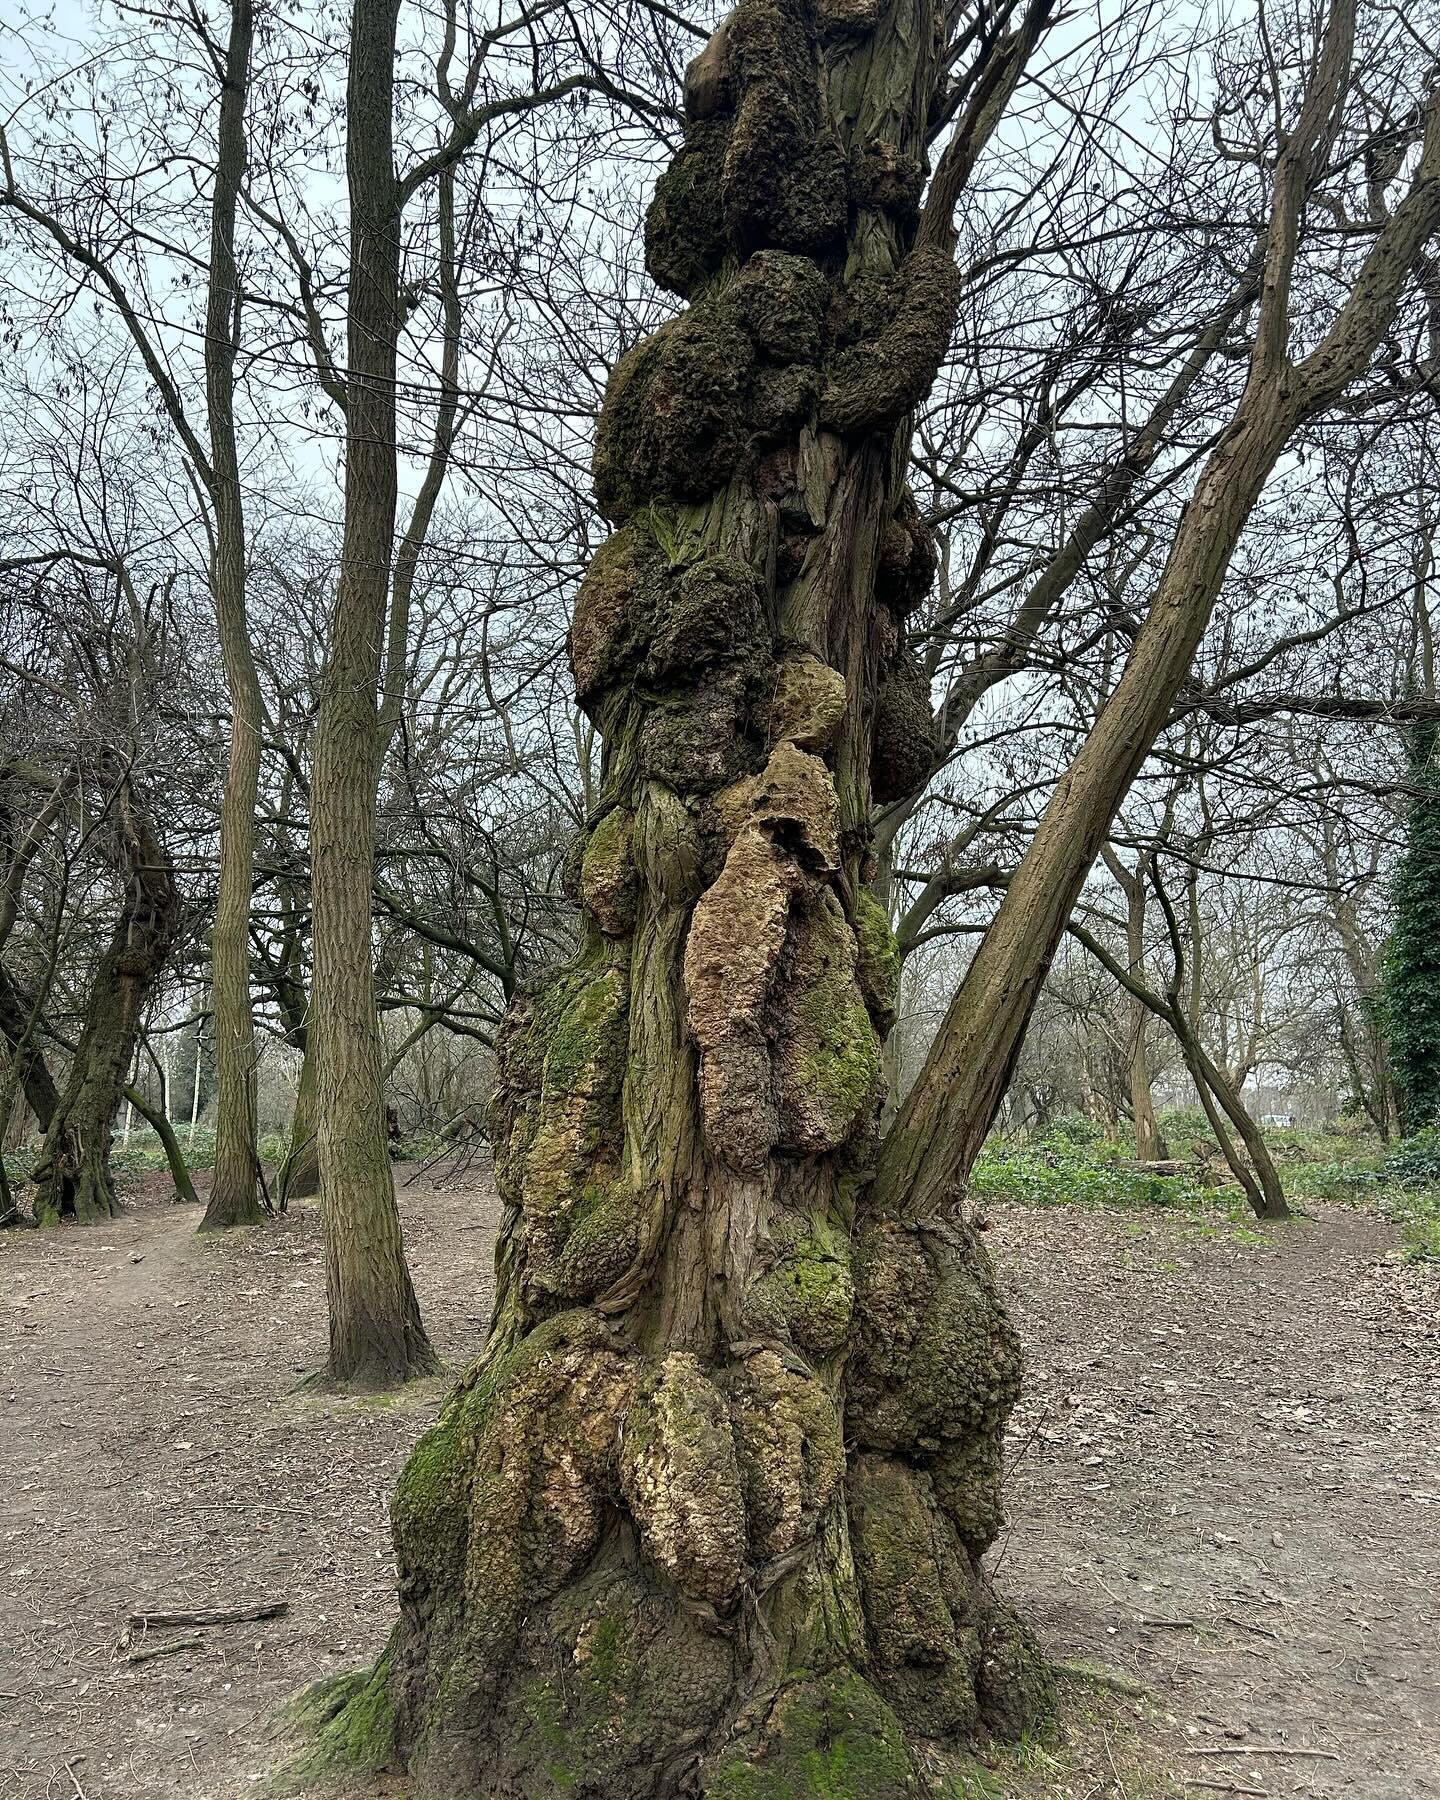 You might be stiff and achey and full of knots, but you&rsquo;re still great as you are. #yogaforhealthyaging #yogaforhealth #yogaformenopause #yogaforolderadults #yogaforachesandpains #swlondon #sw2 #swlondonyoga #streathamyoga #treesofinstagram #tr